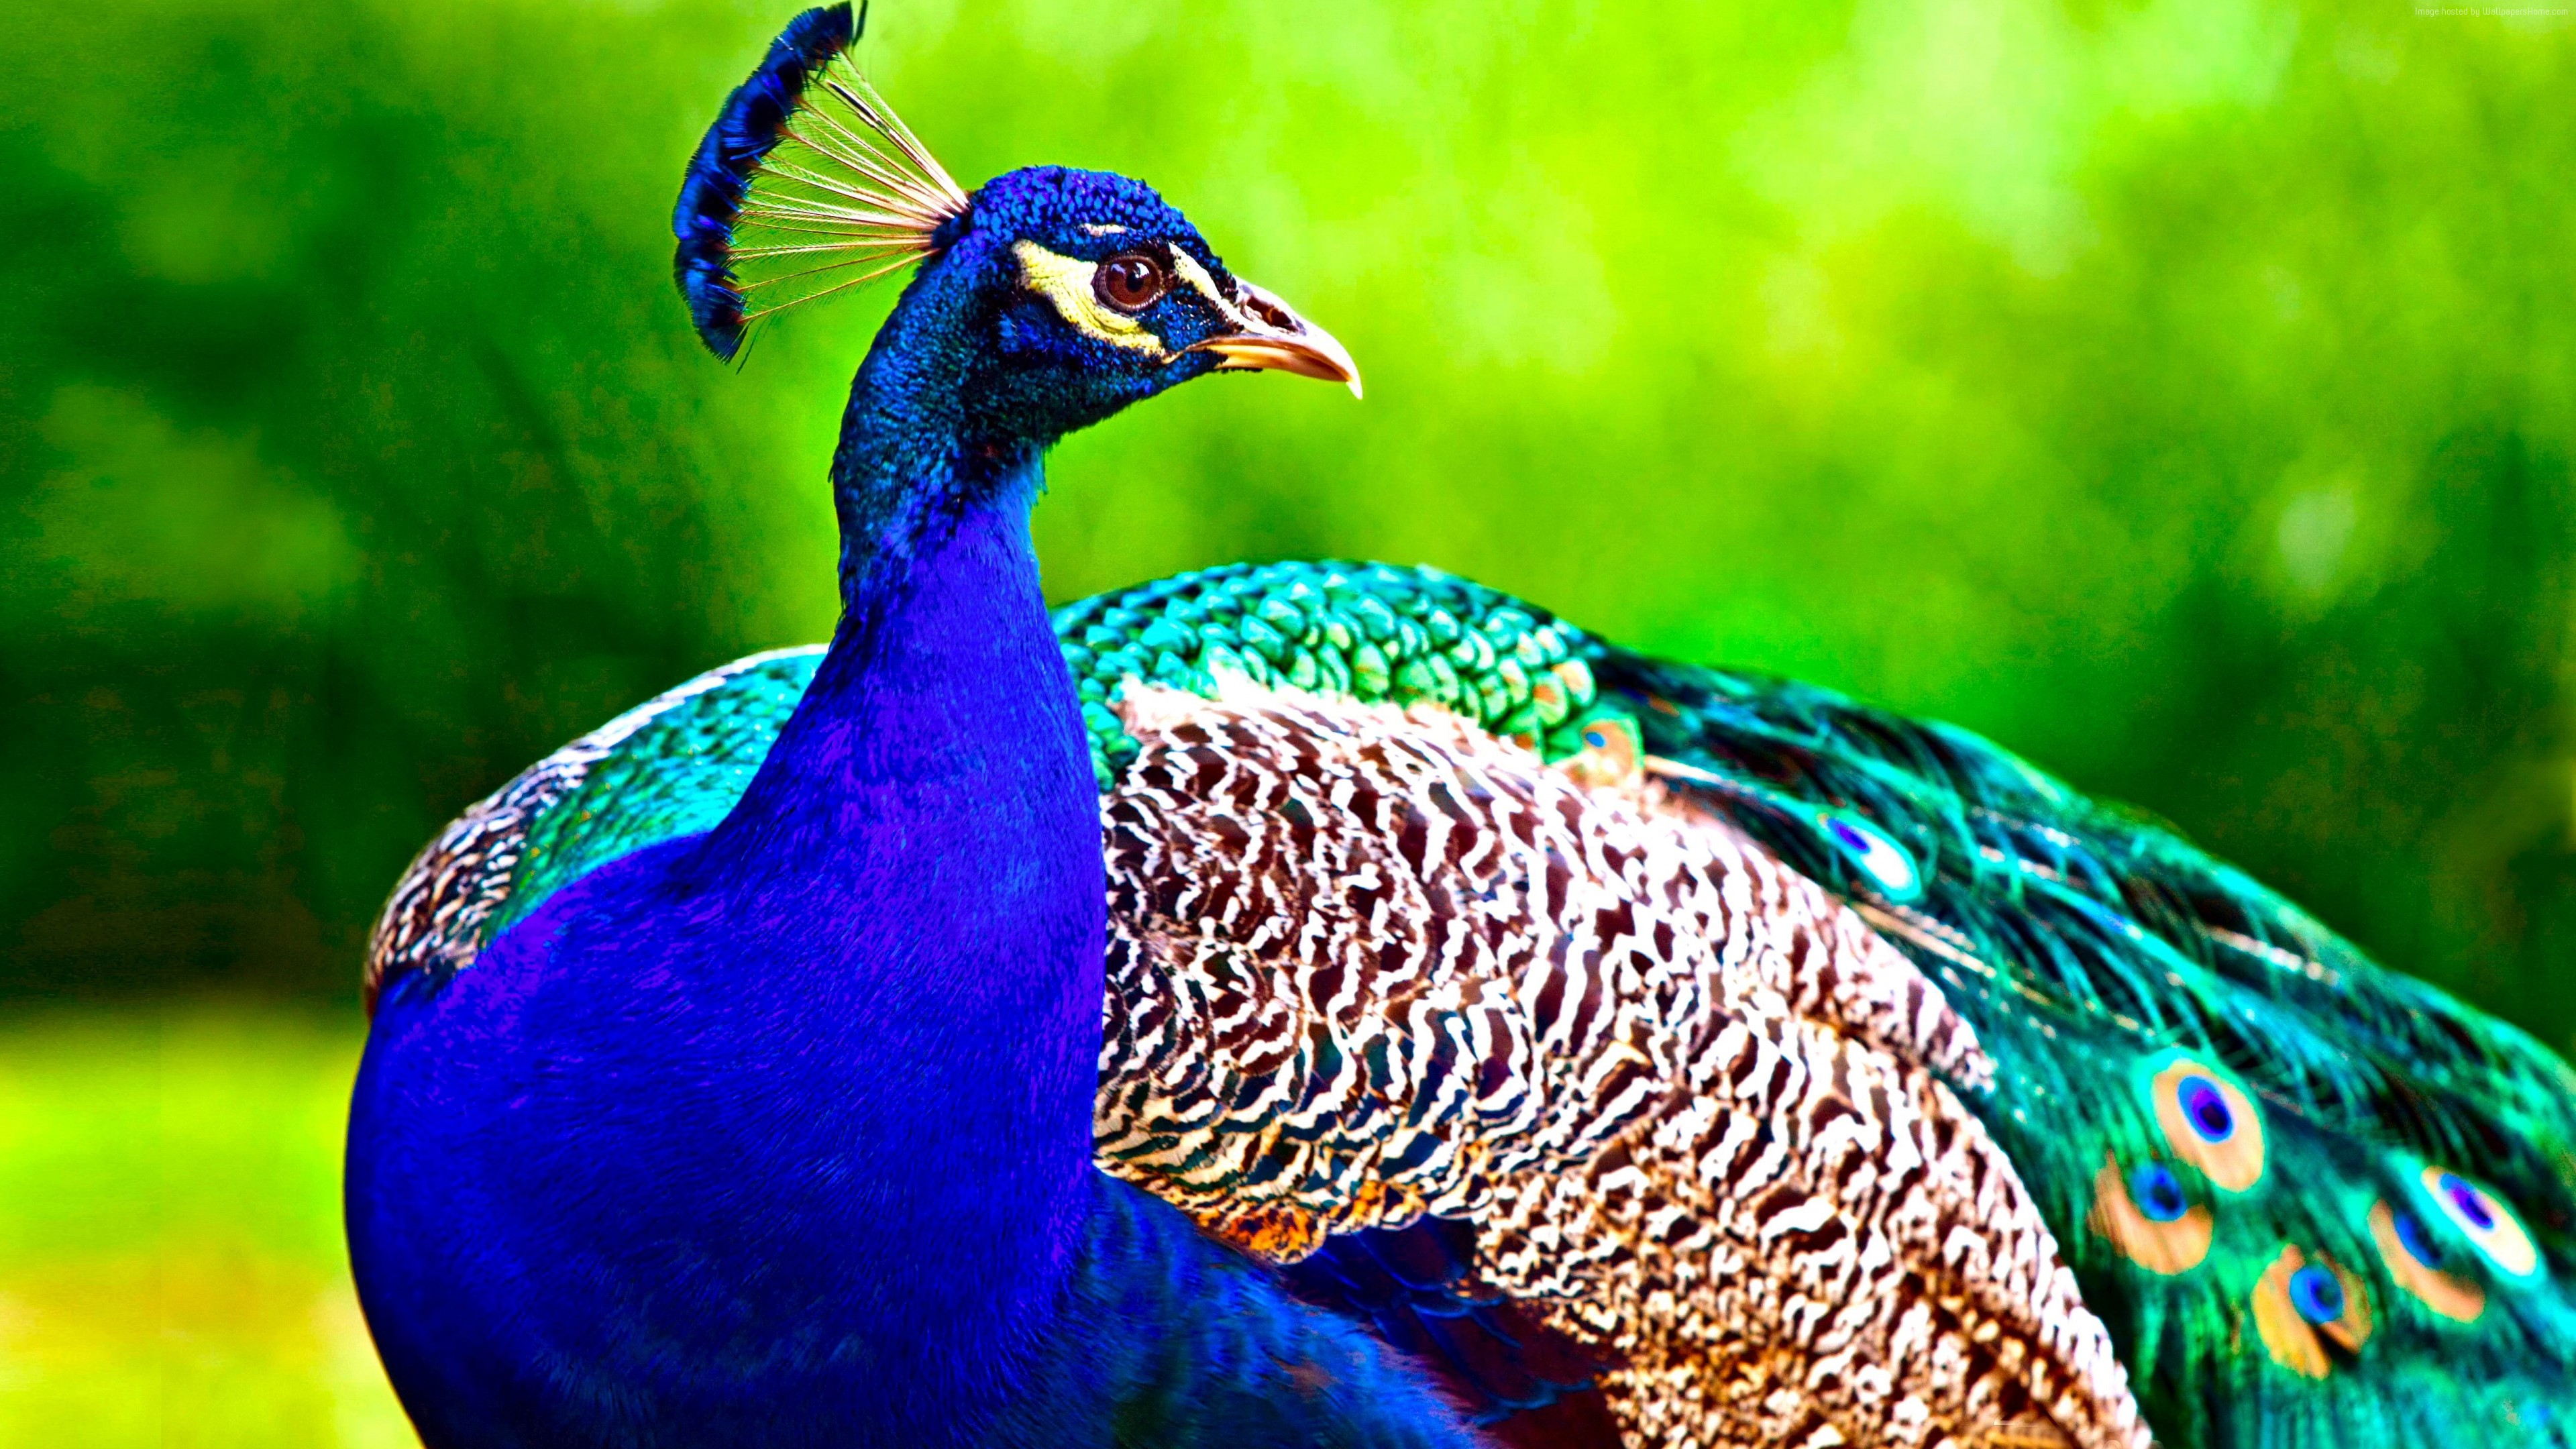 Wallpaper Peacock, feathers, Animals Wallpaper Download - High